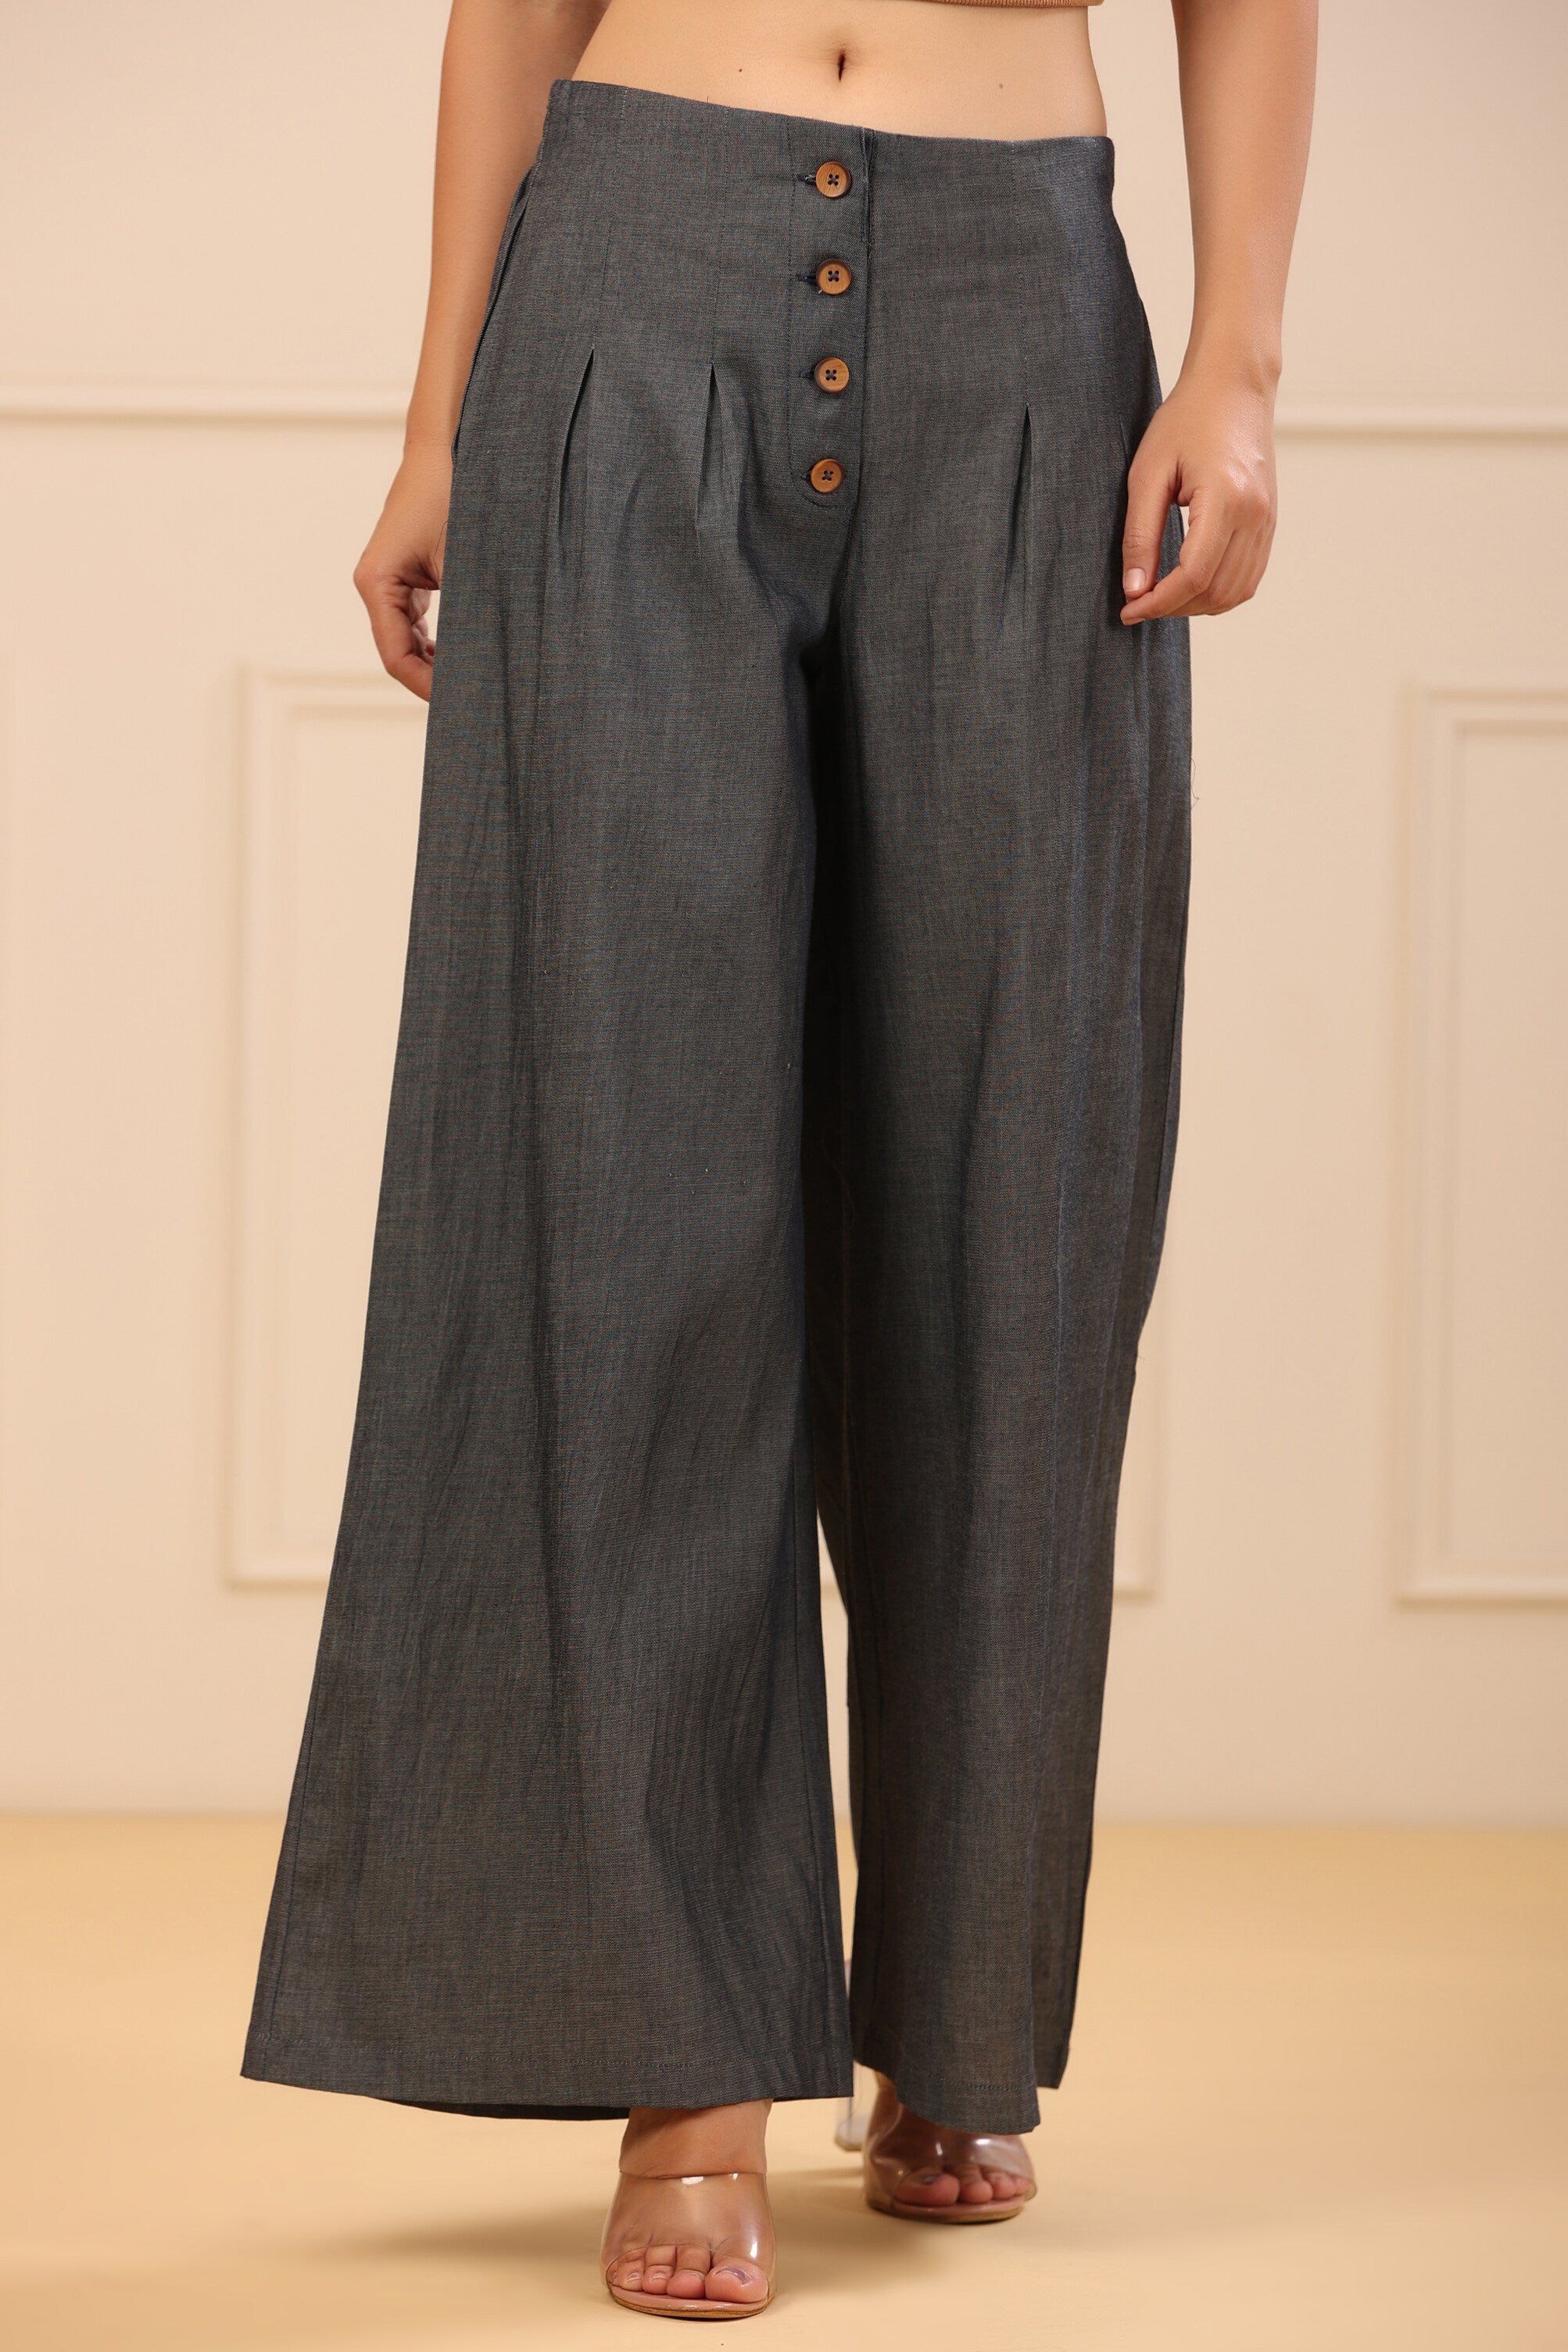 Juniper Grey Solid Denim Flared Palazzos with a Button Closure & Partially Elasticated Waistband